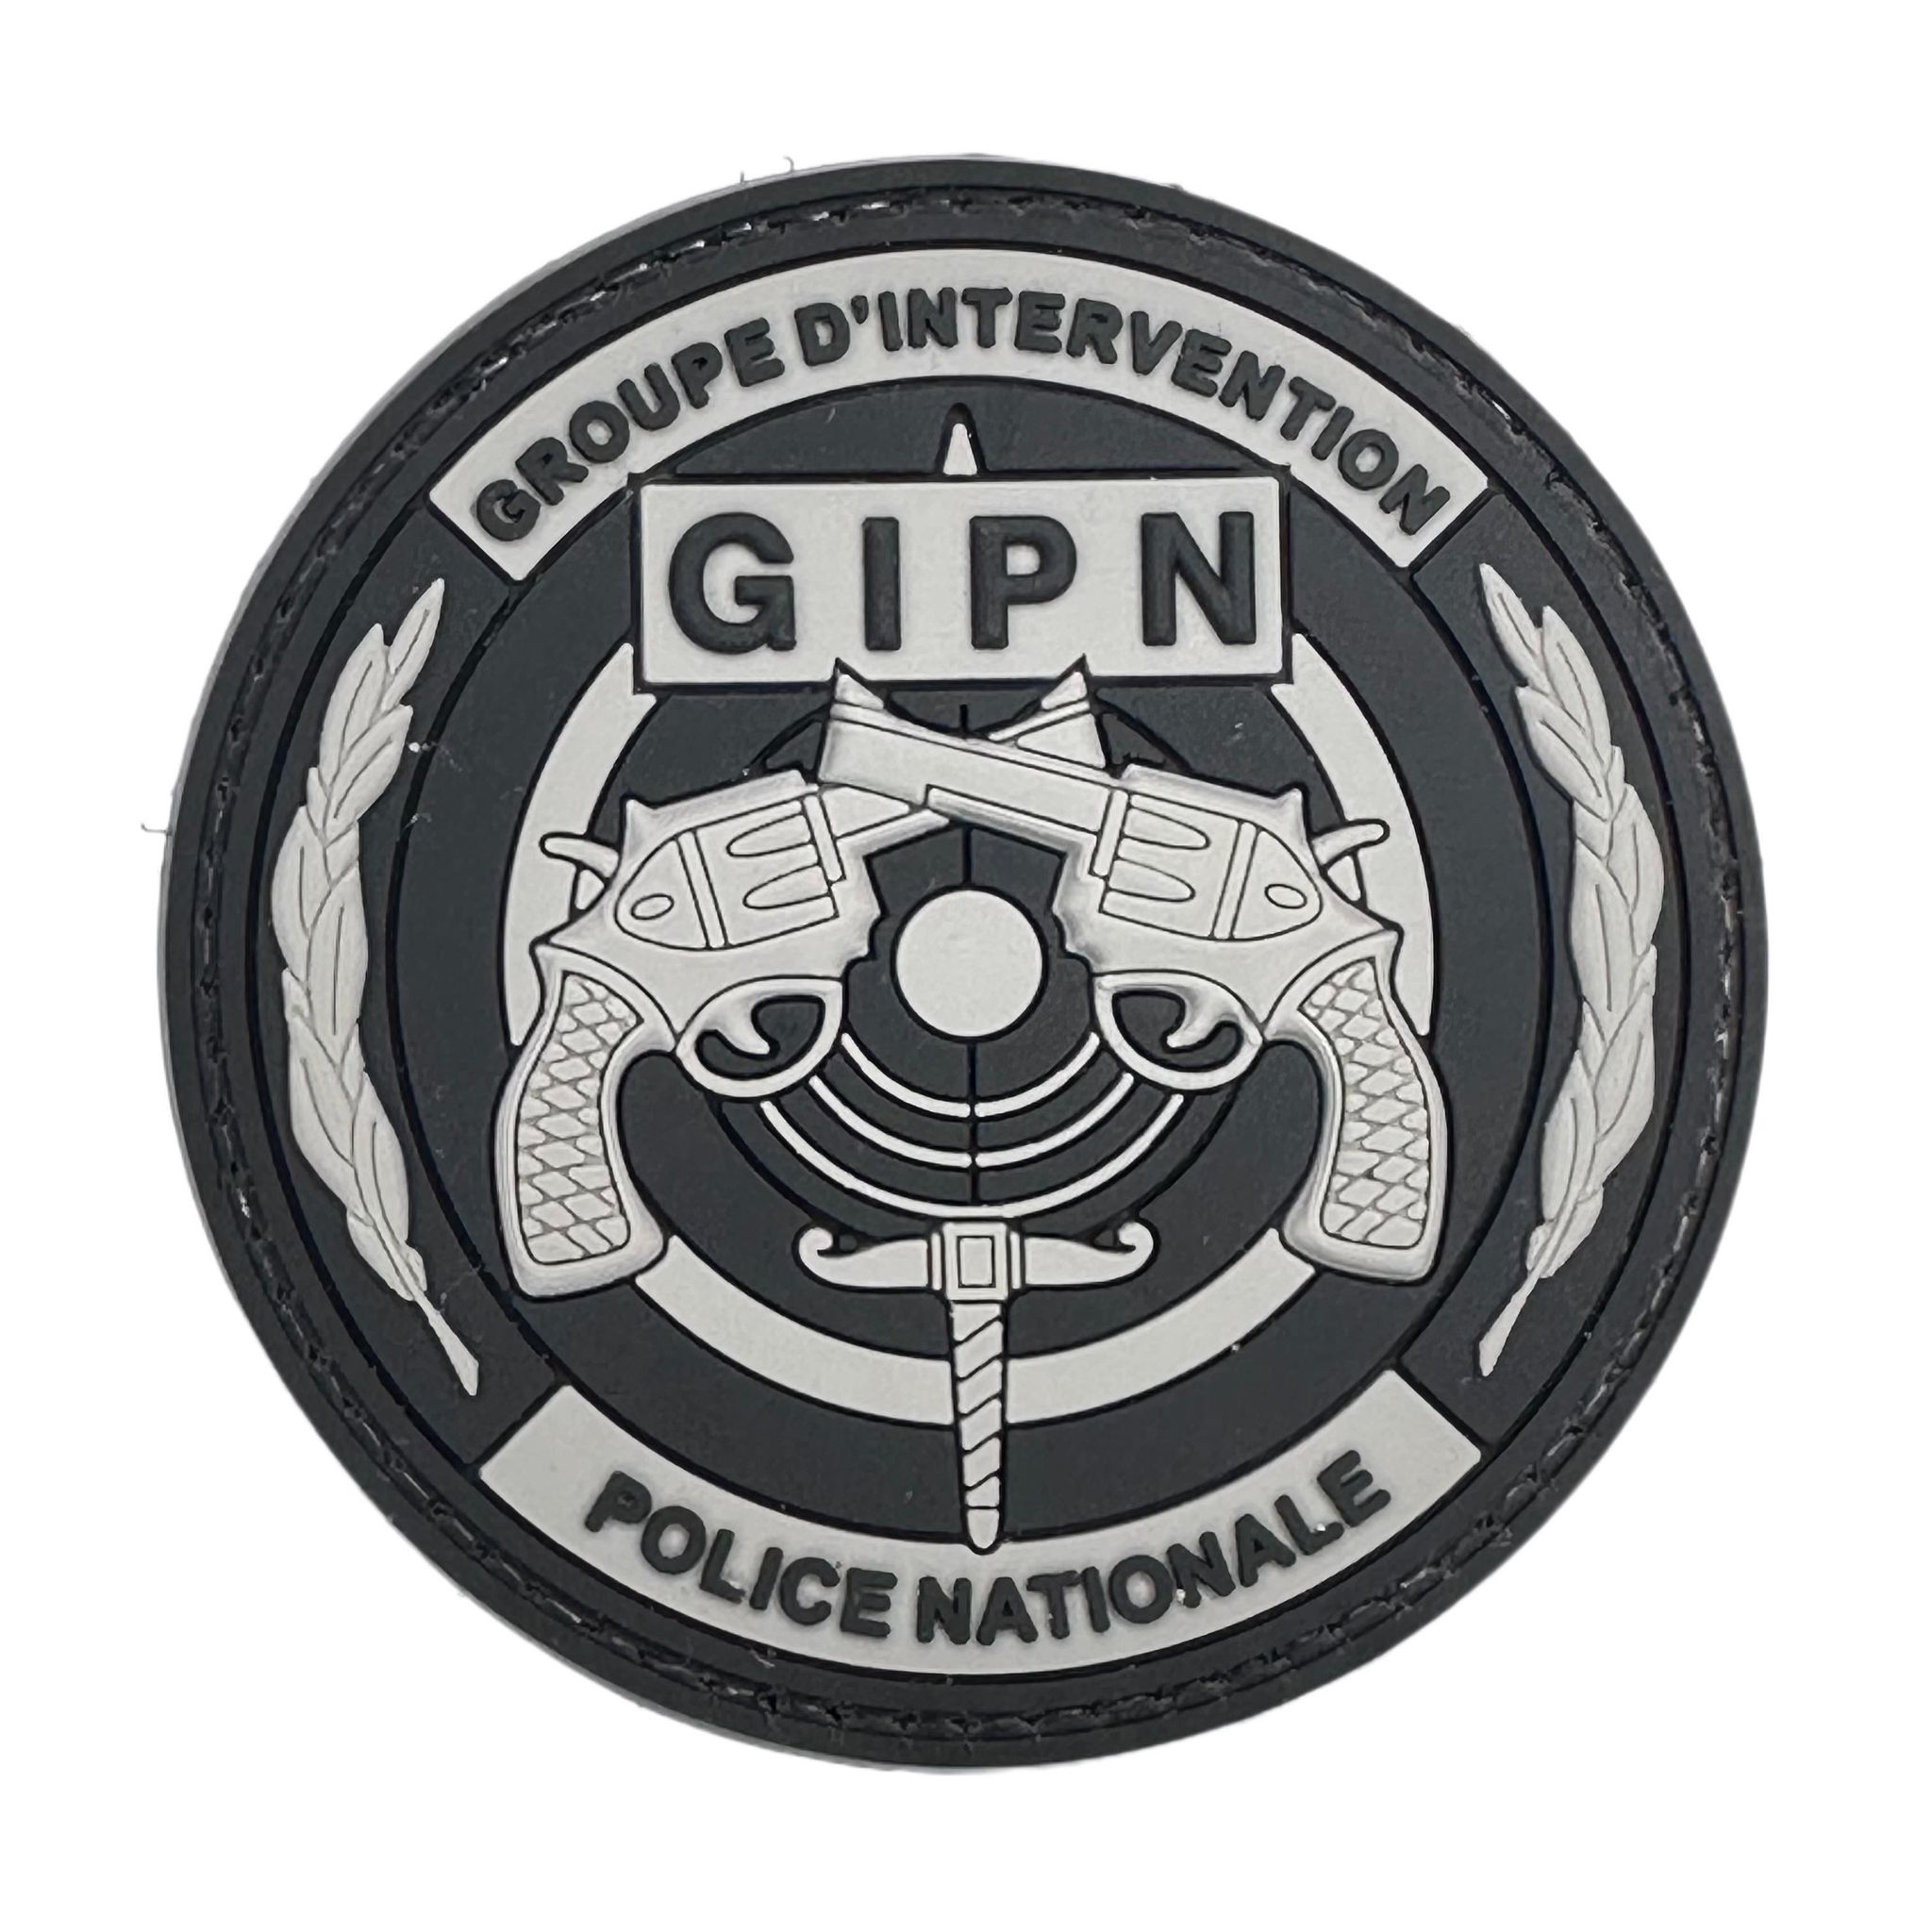 Rubber Patch Gipn Group D Intervention Police Nationale